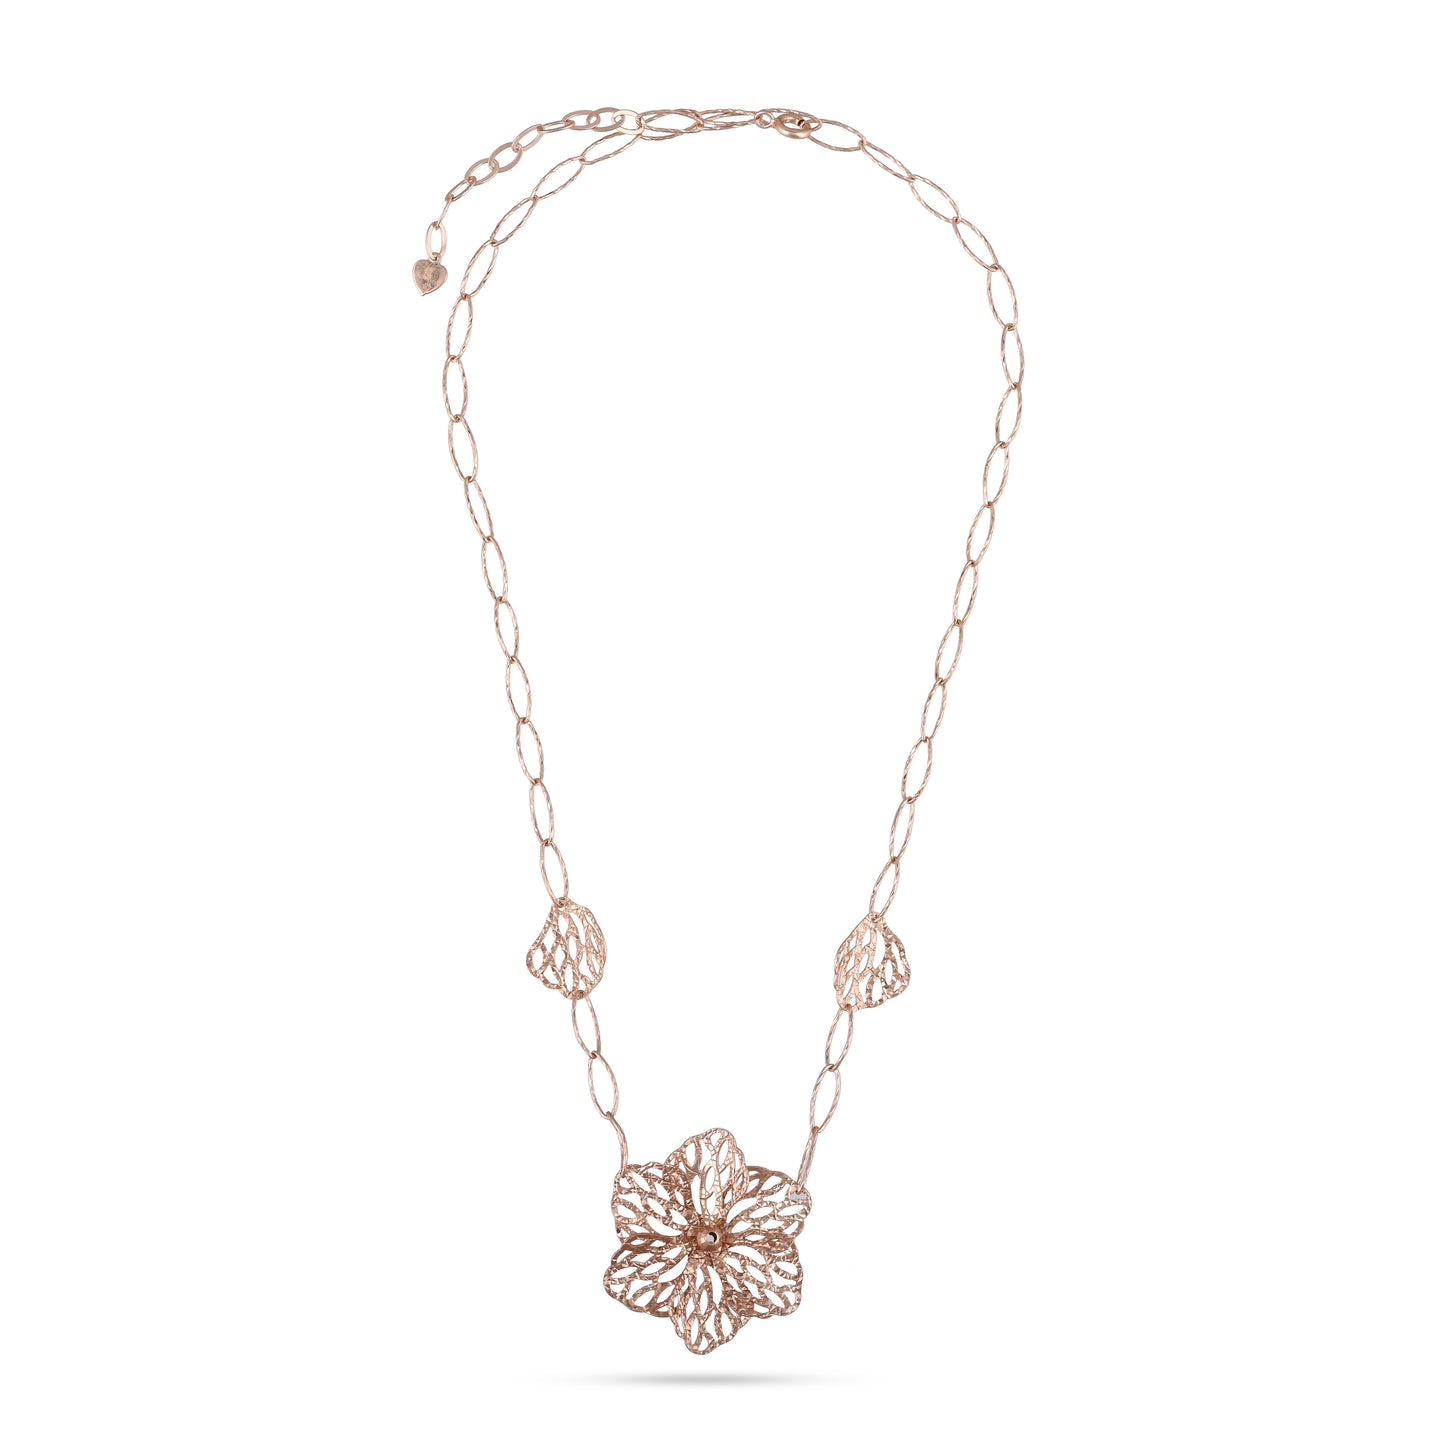 Elegant Rose Gold Flower Silver Necklace - From Purl Purl